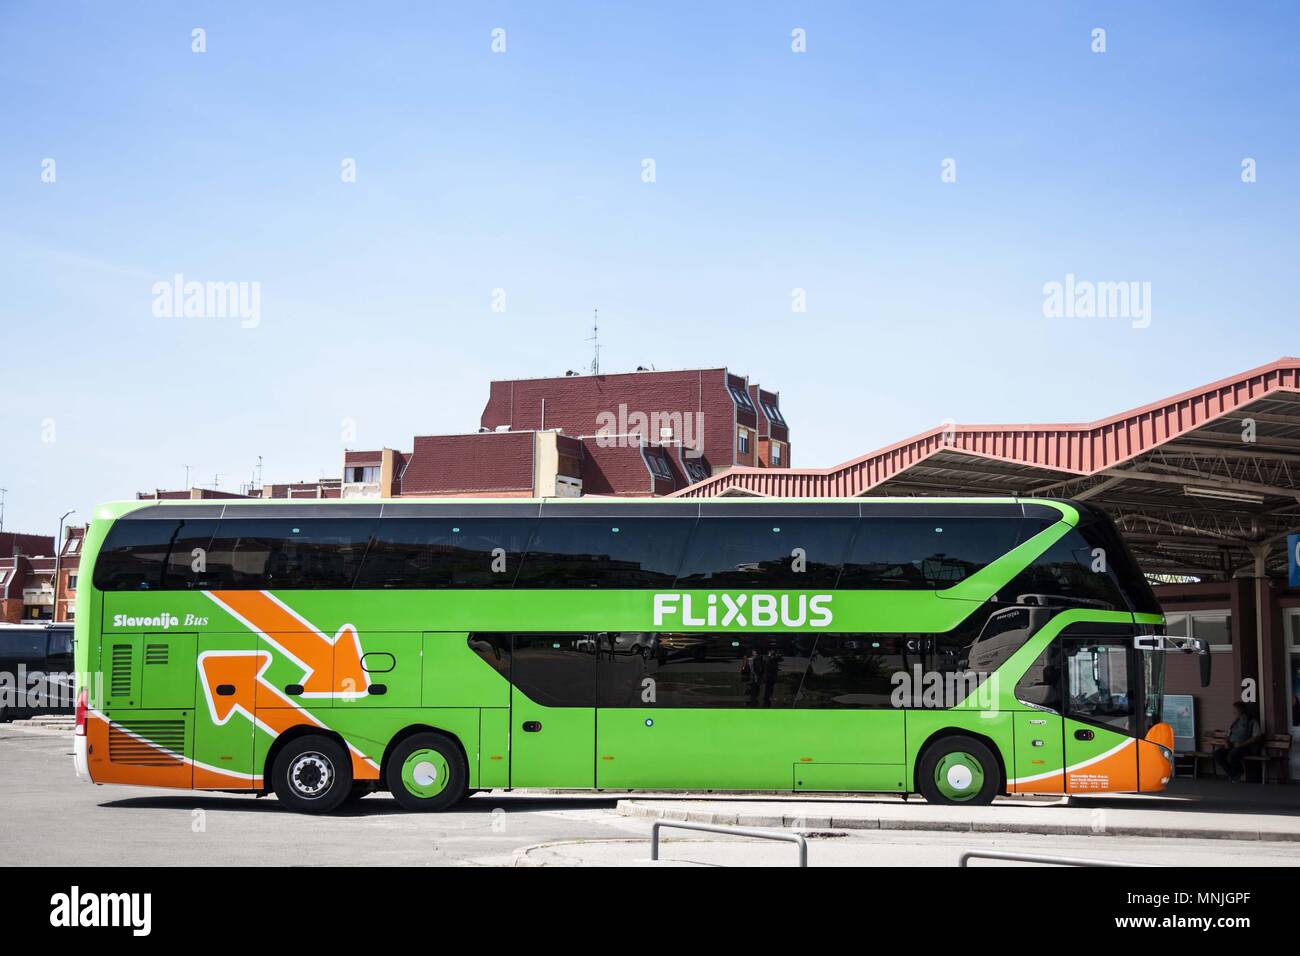 VUKOVAR, CROATIA - APRIL 20, 2018: Flixbus bus ready for departure in Vukovar Bus station. Flixbus is a German brand which offers low cost intercity b Stock Photo